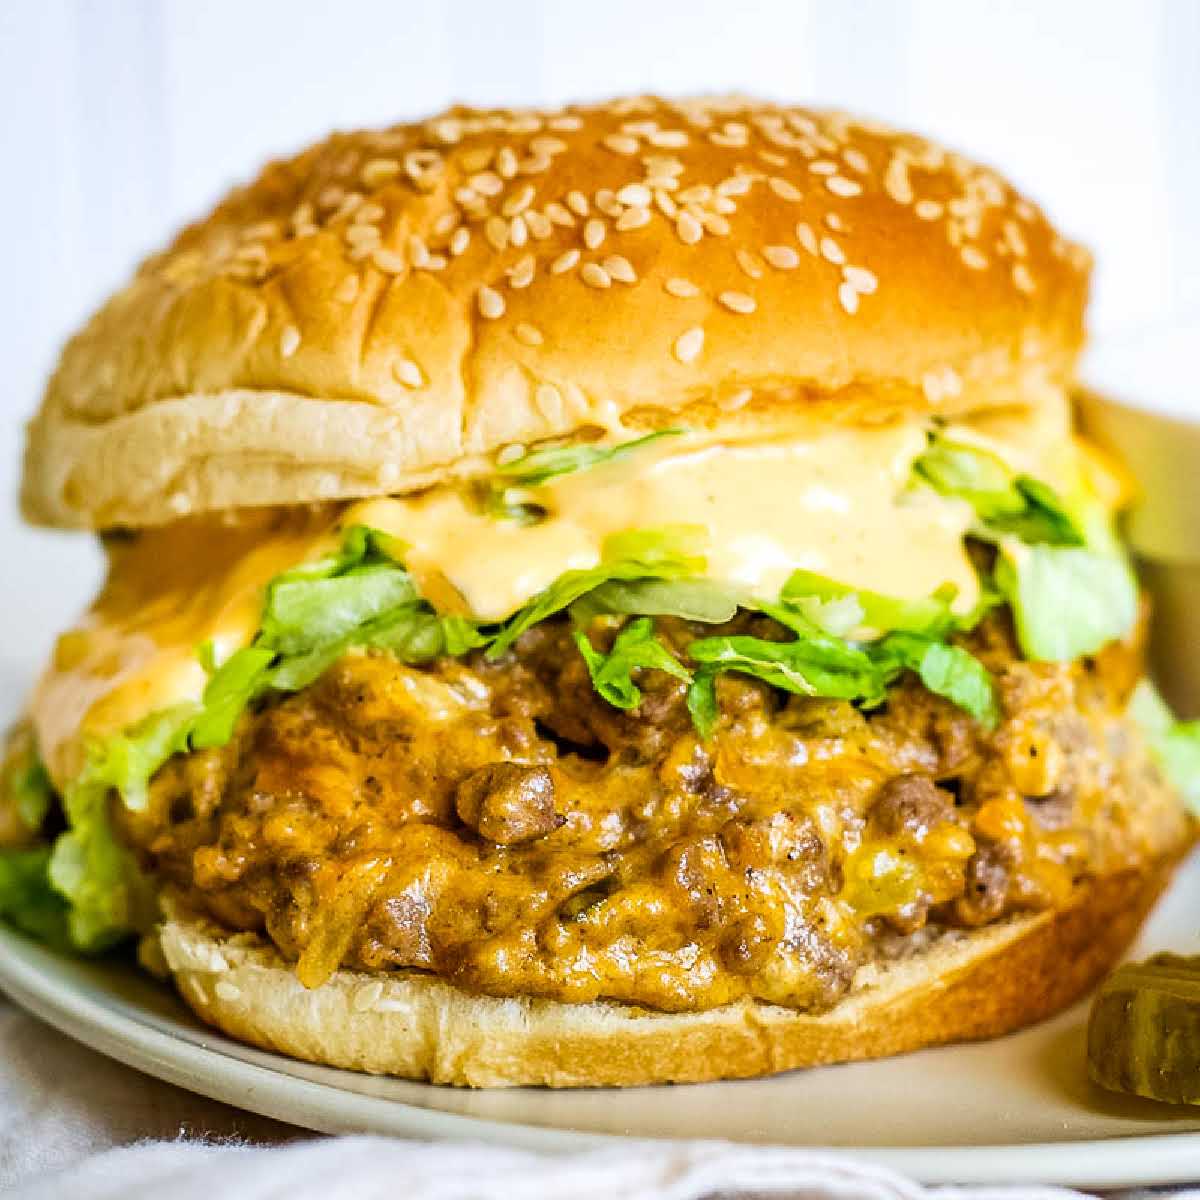 A Big Mac sloppy joe on a plate topped with lettuce and secret sauce.